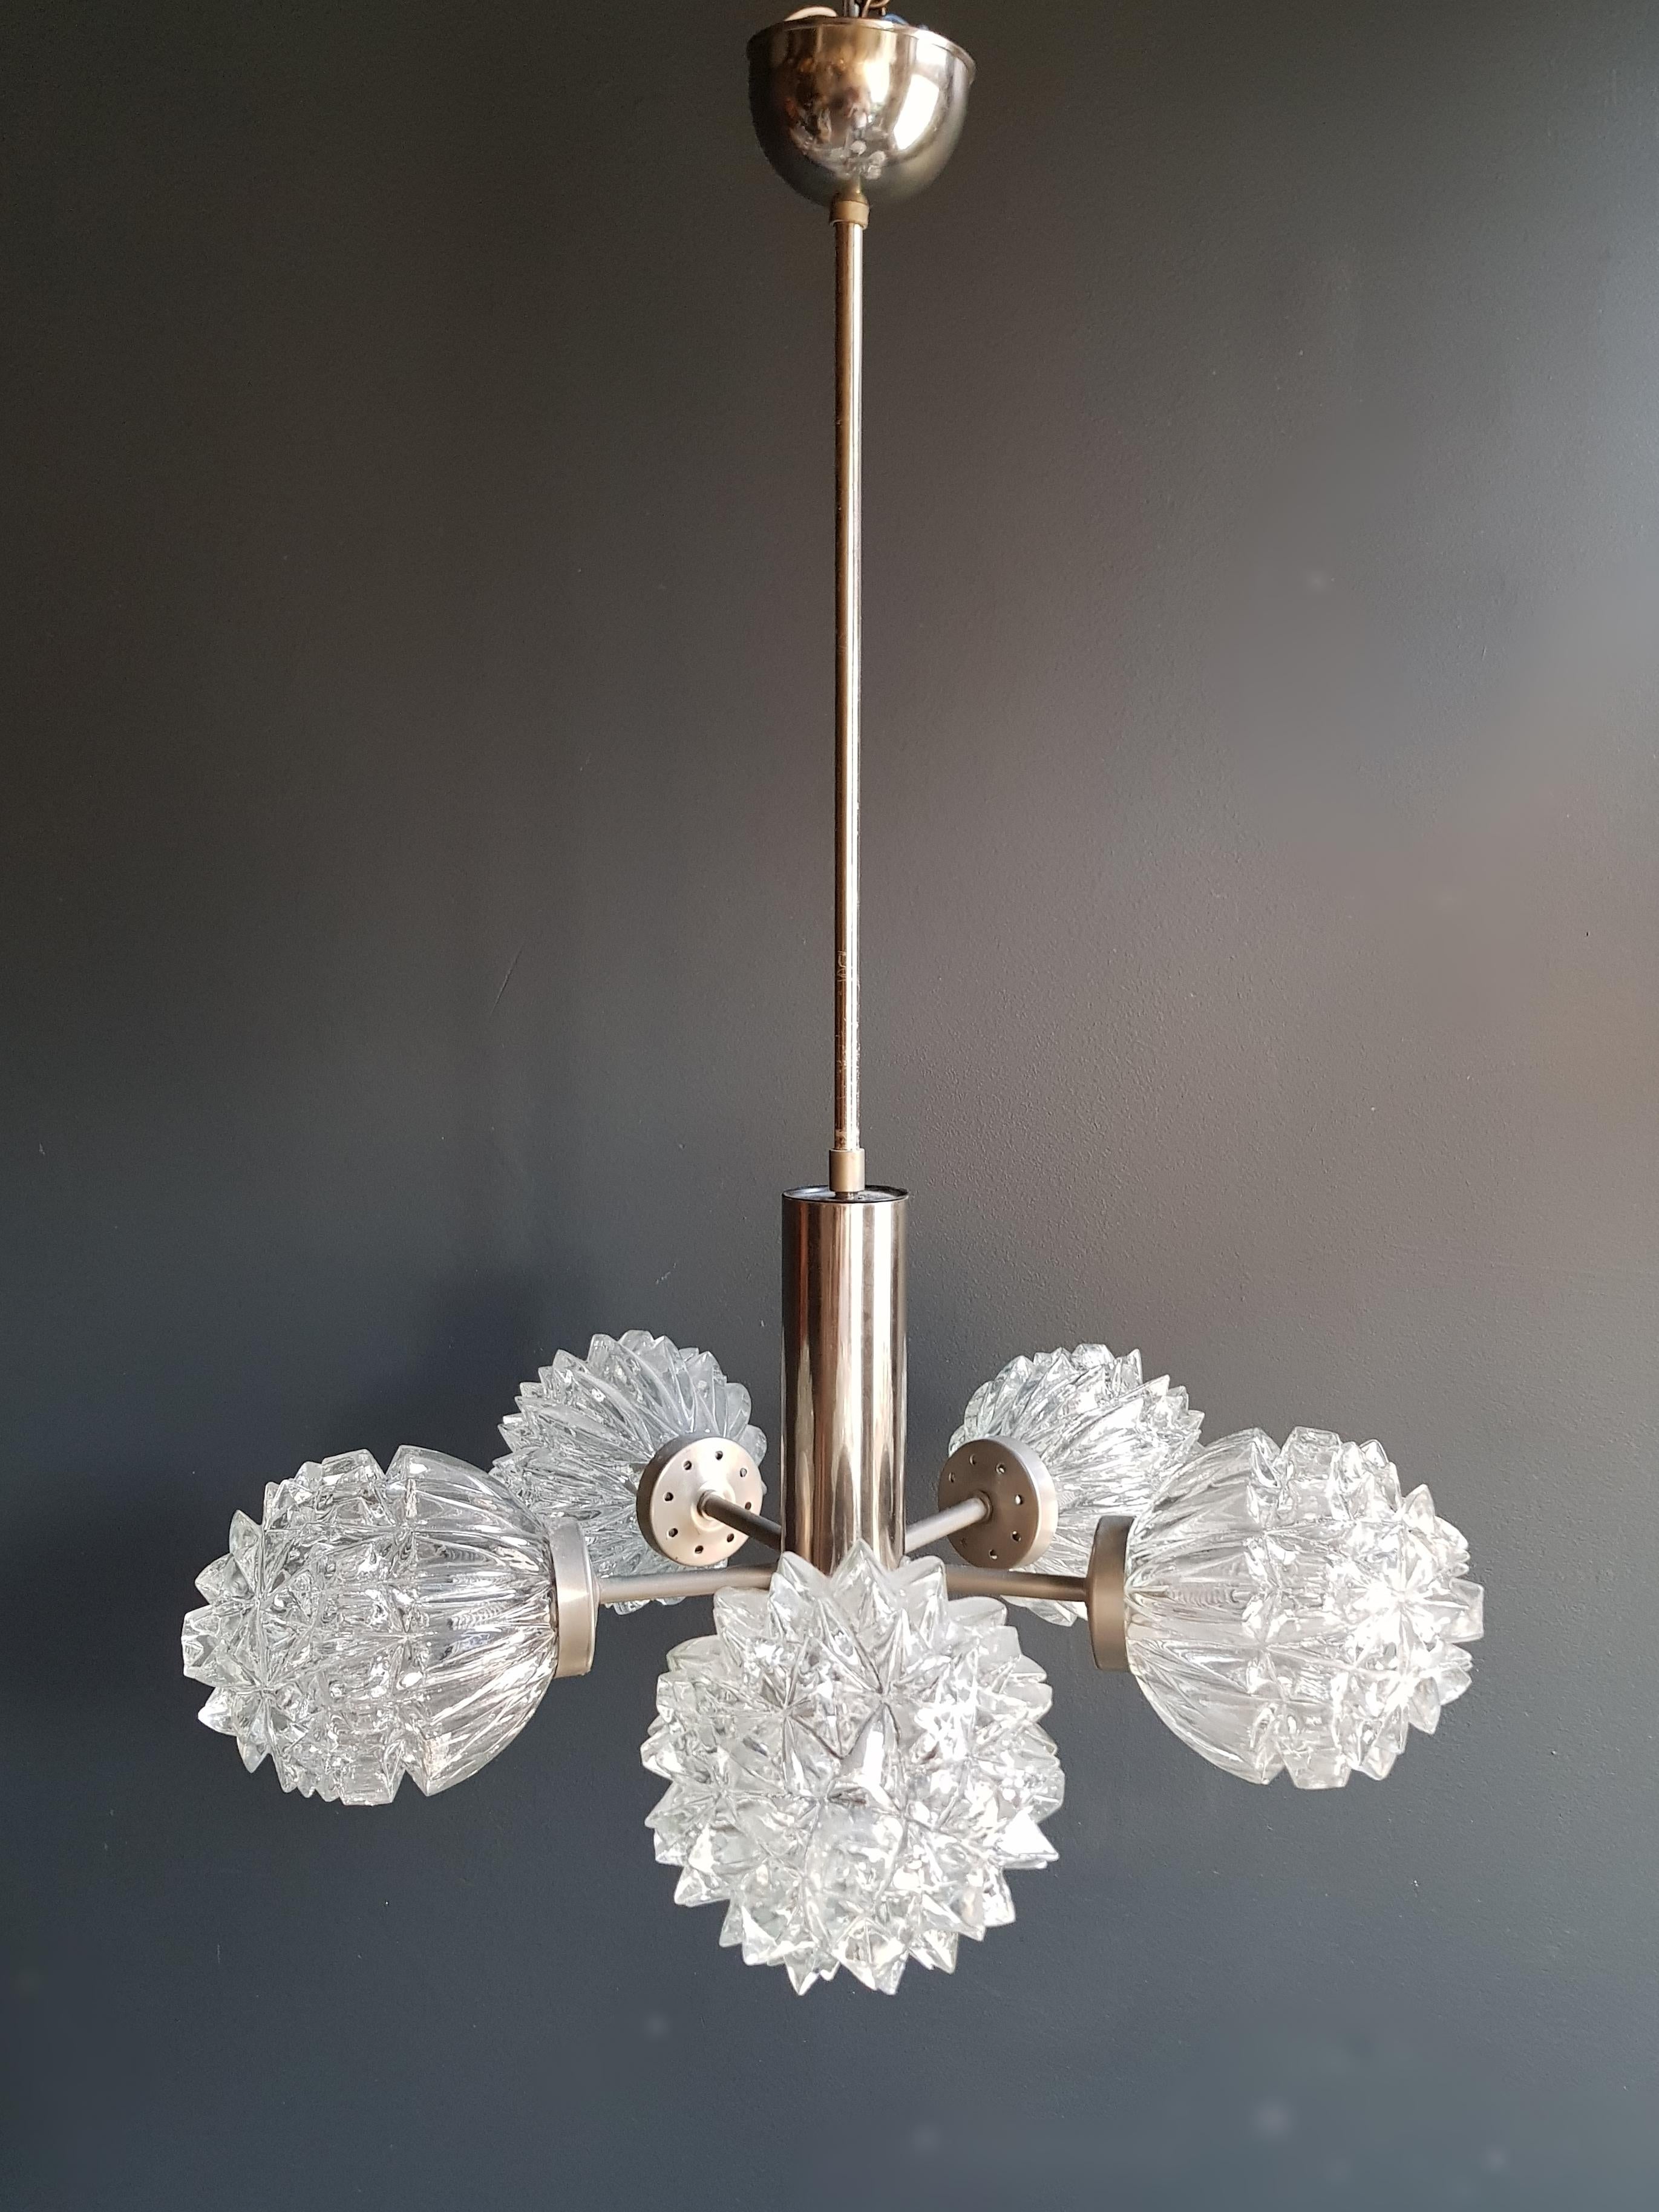 1970s Vintage Pendant Chandelier - Space Age UFO Atom Lamp in Chrome

Introducing a captivating vintage pendant chandelier that perfectly encapsulates the aesthetic of the 1970s Space Age. This chrome masterpiece takes inspiration from UFOs and atom